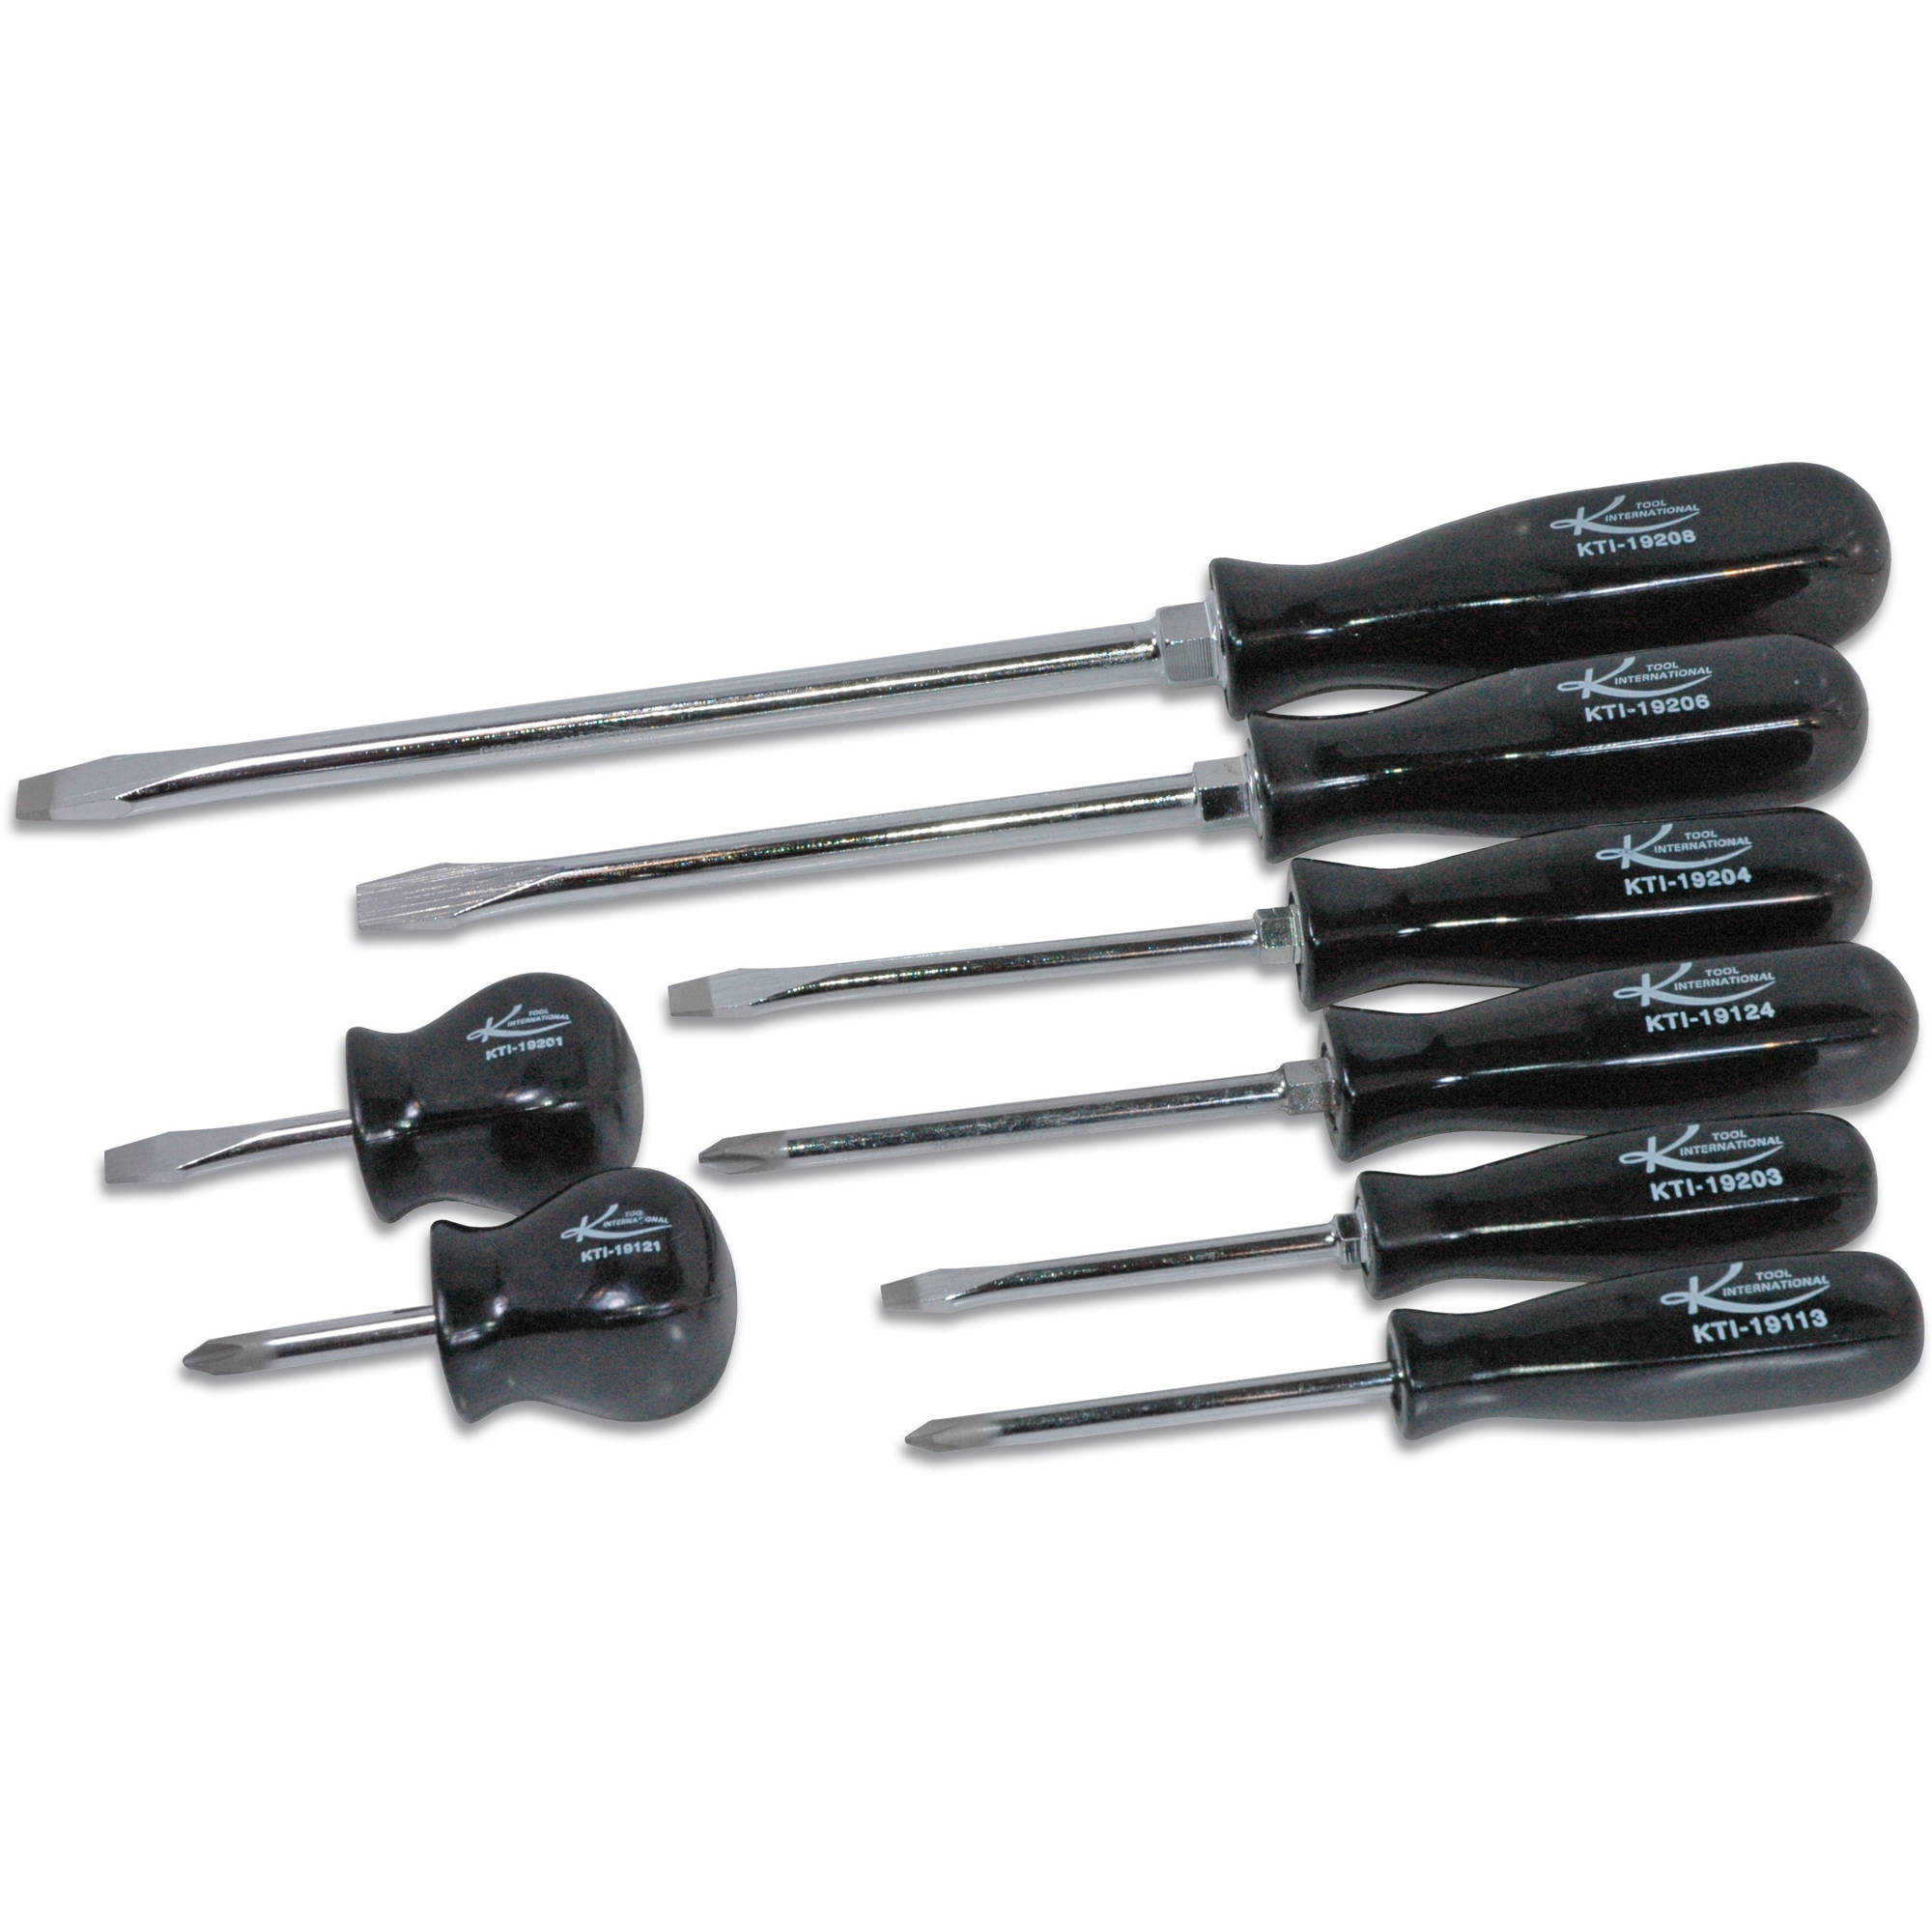 Screwdriver Set, Phillips and Slotted, 8 Pieces